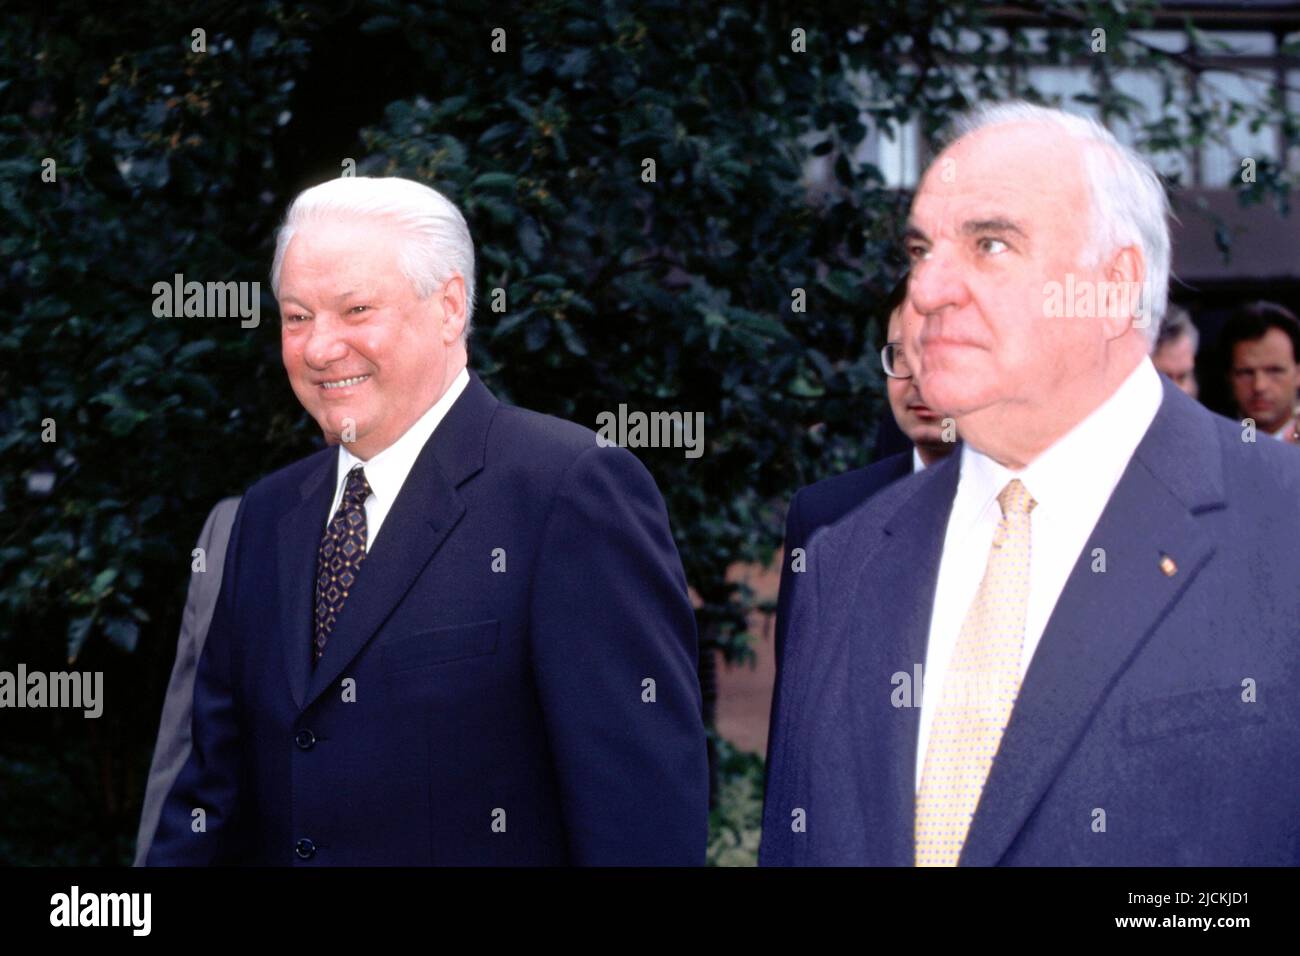 ARCHIVE PHOTO: 5 years ago, on June 16, 2017, Helmut KOHL died, , Boris JELZIN, left, Russian President, and Federal Chancellor Helmut KOHL, Germany, half-length portrait, here at the German-Russian summit consultations in Bonn, June 15, 1998, Stock Photo